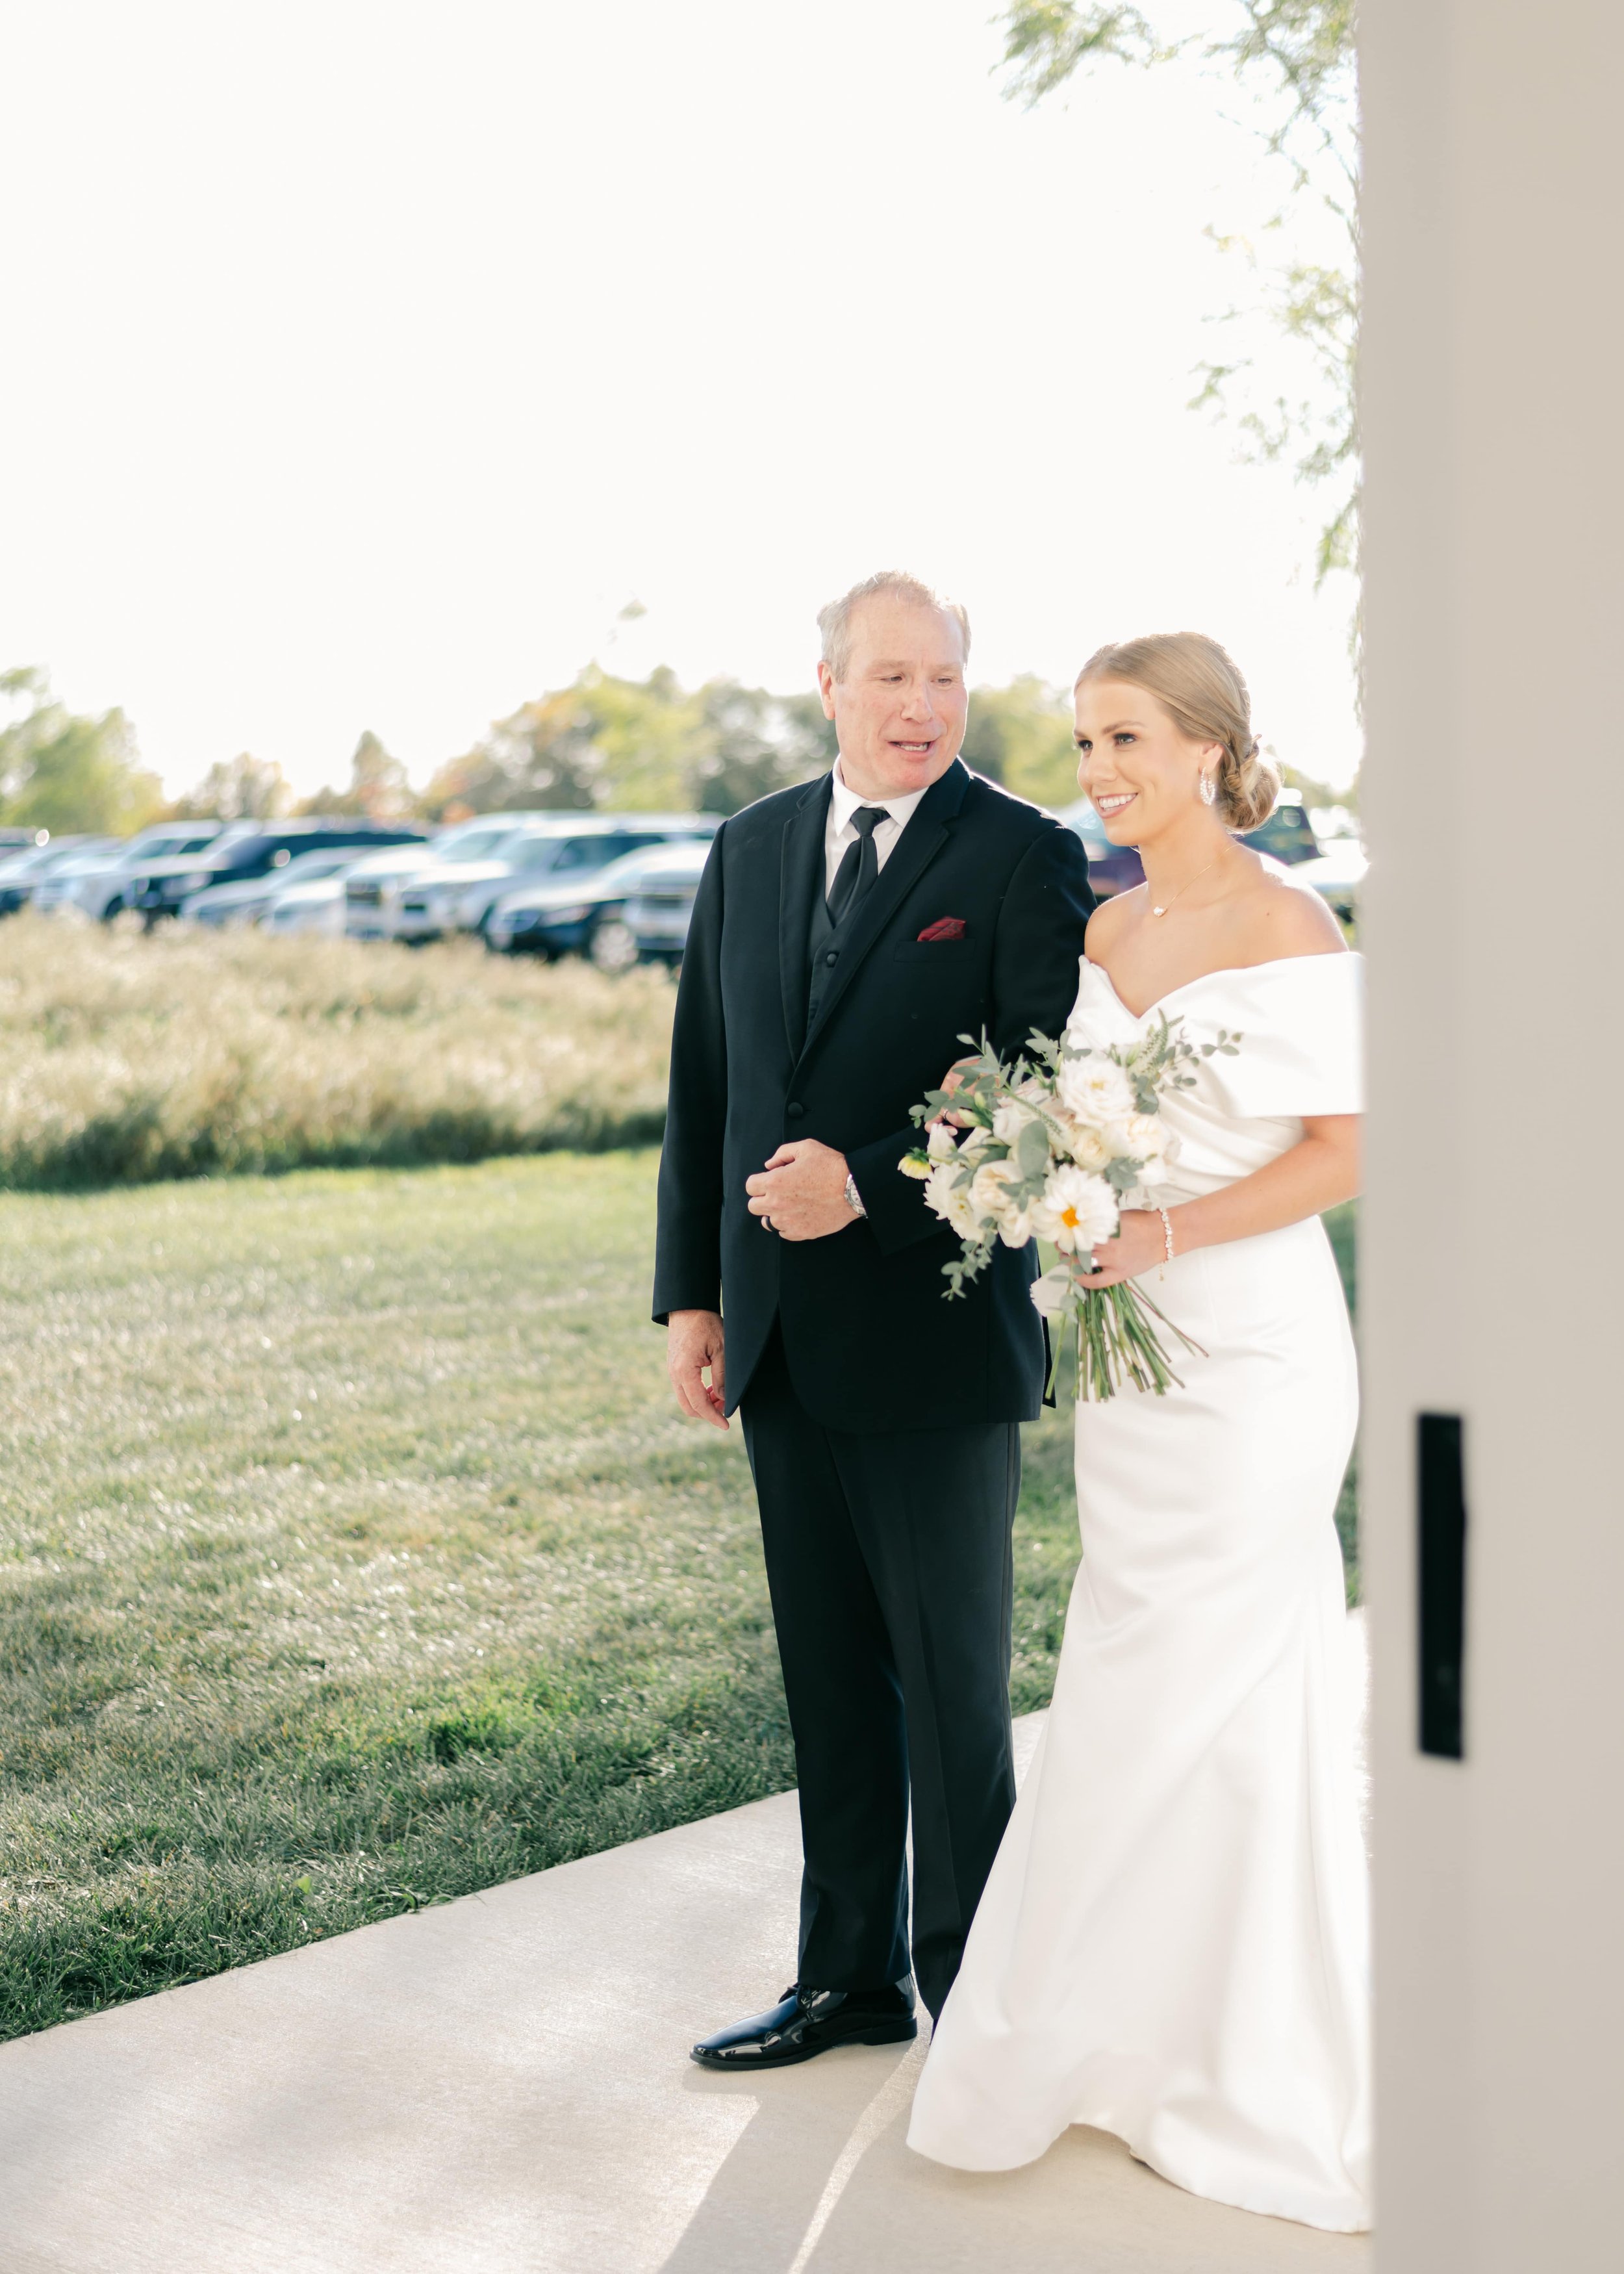 outdoor fall wedding ceremony_interactive_family focused_emerson fields (4).jpg